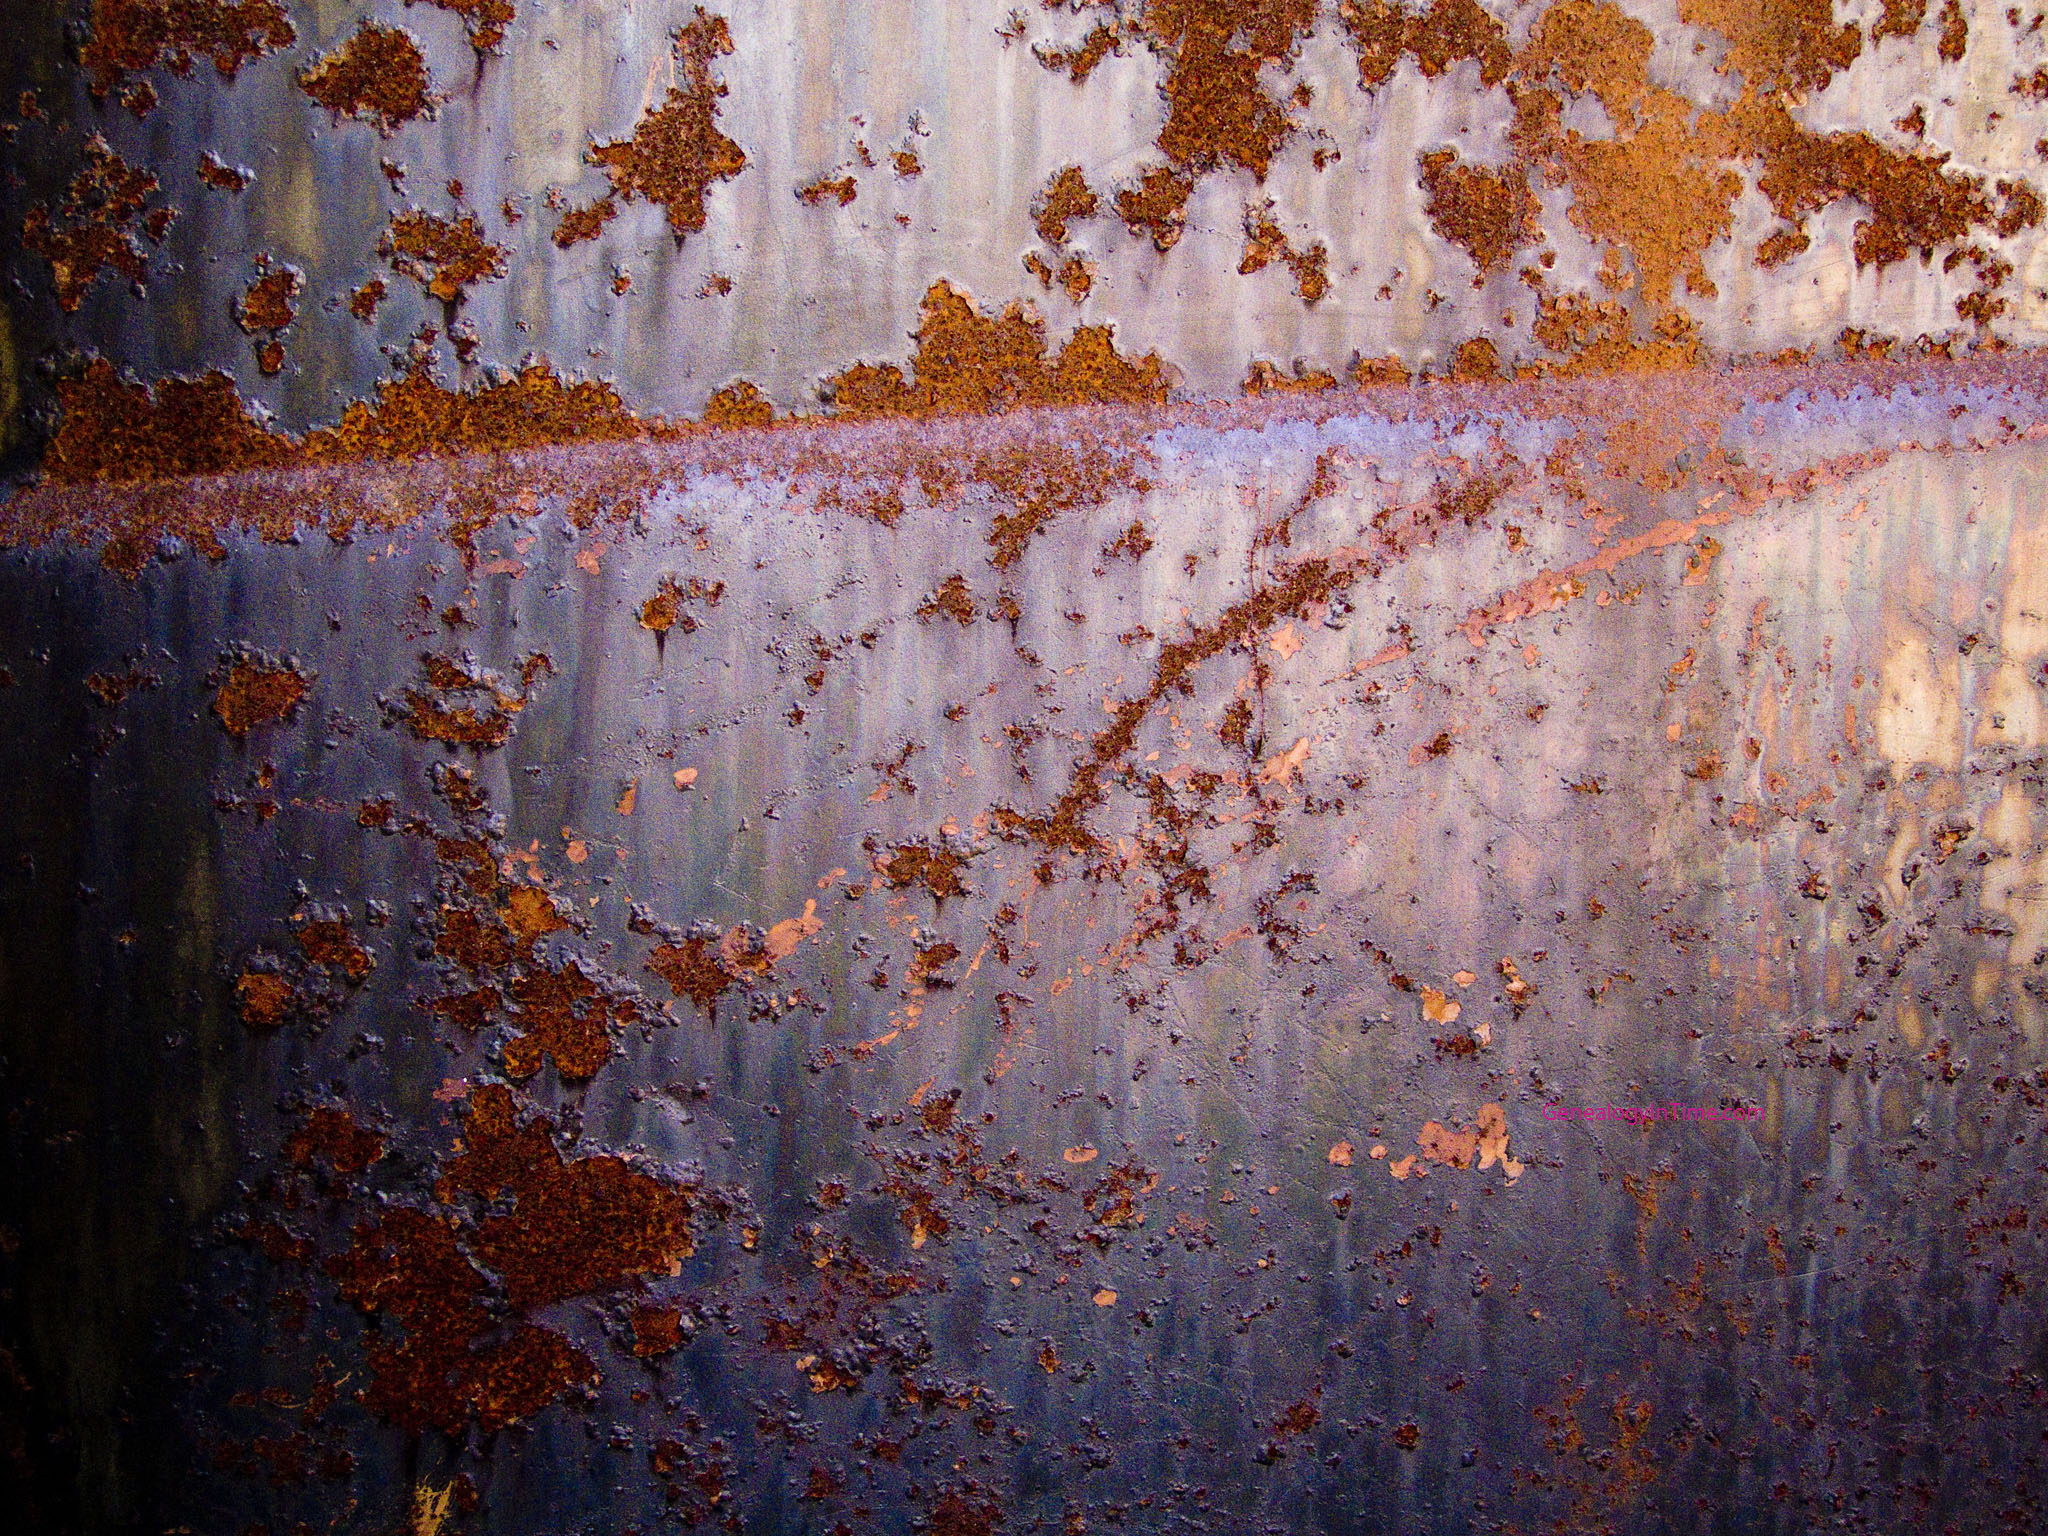 1940s Desktop Wallpaper Ford Truck Rusted Cab